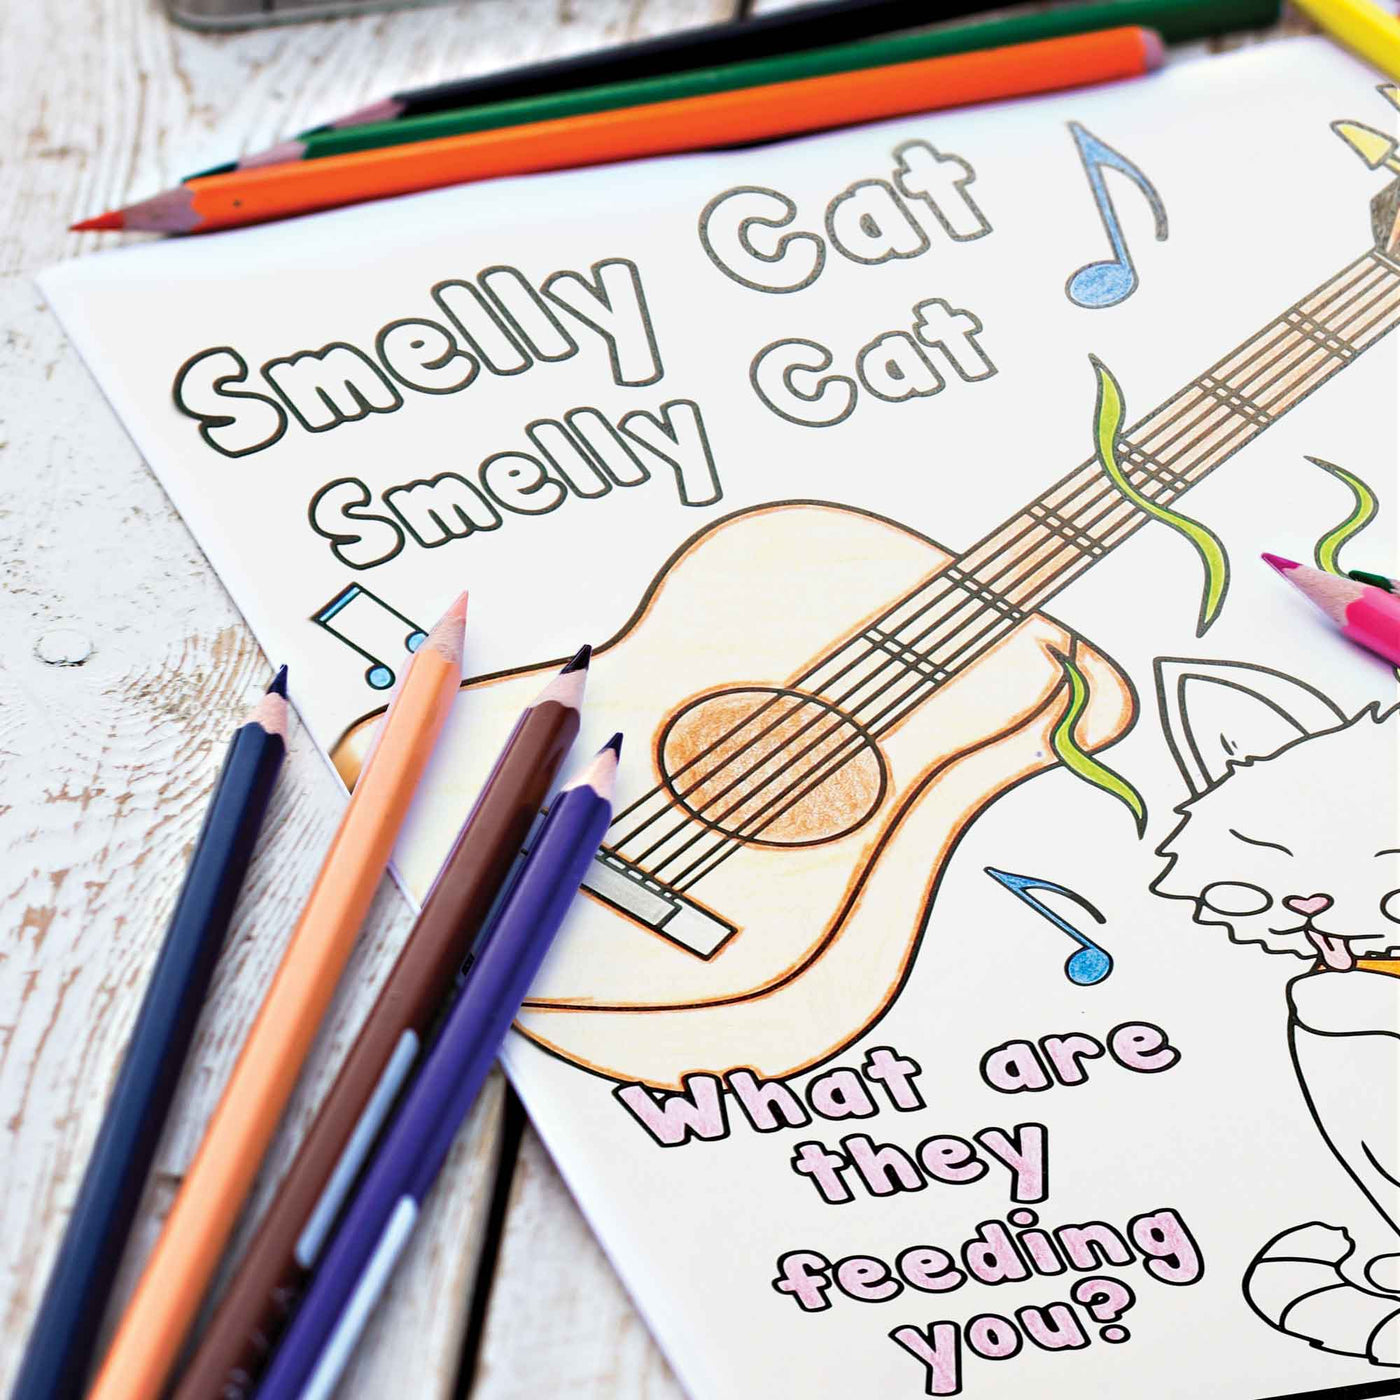 The One With The Colors Coloring Page, Smelly Cat.